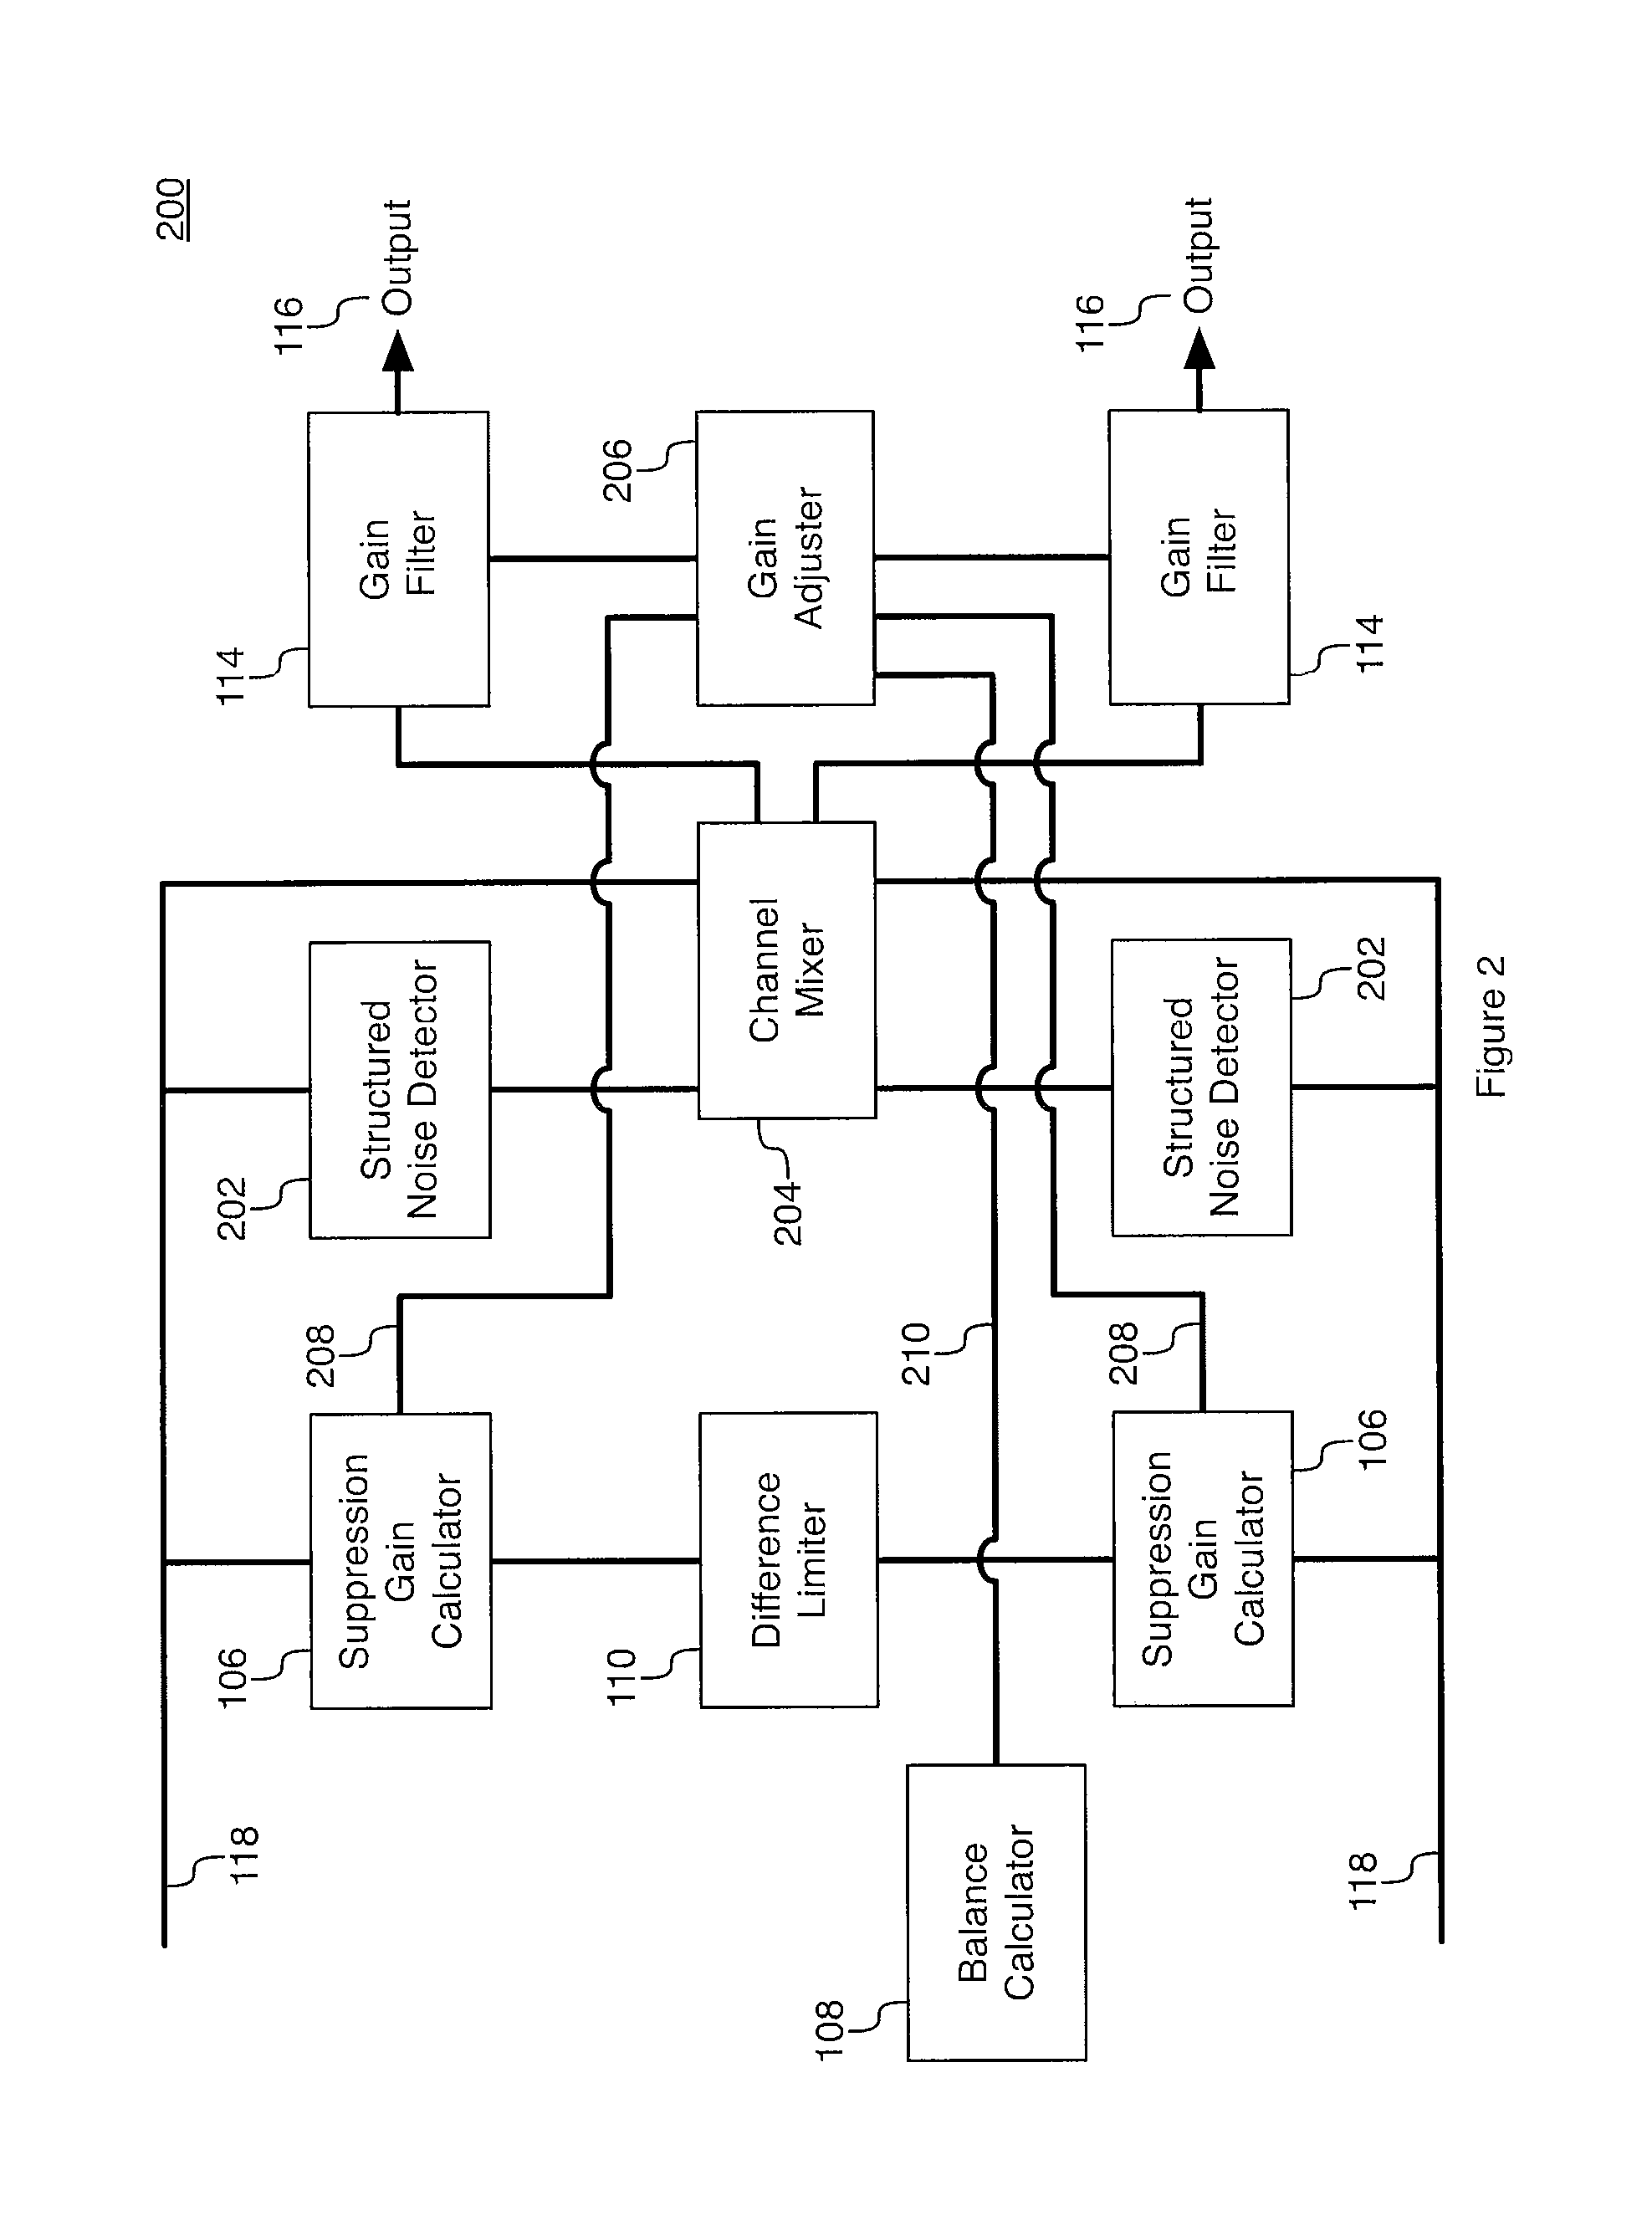 Sound field spatial stabilizer with spectral coherence compensation